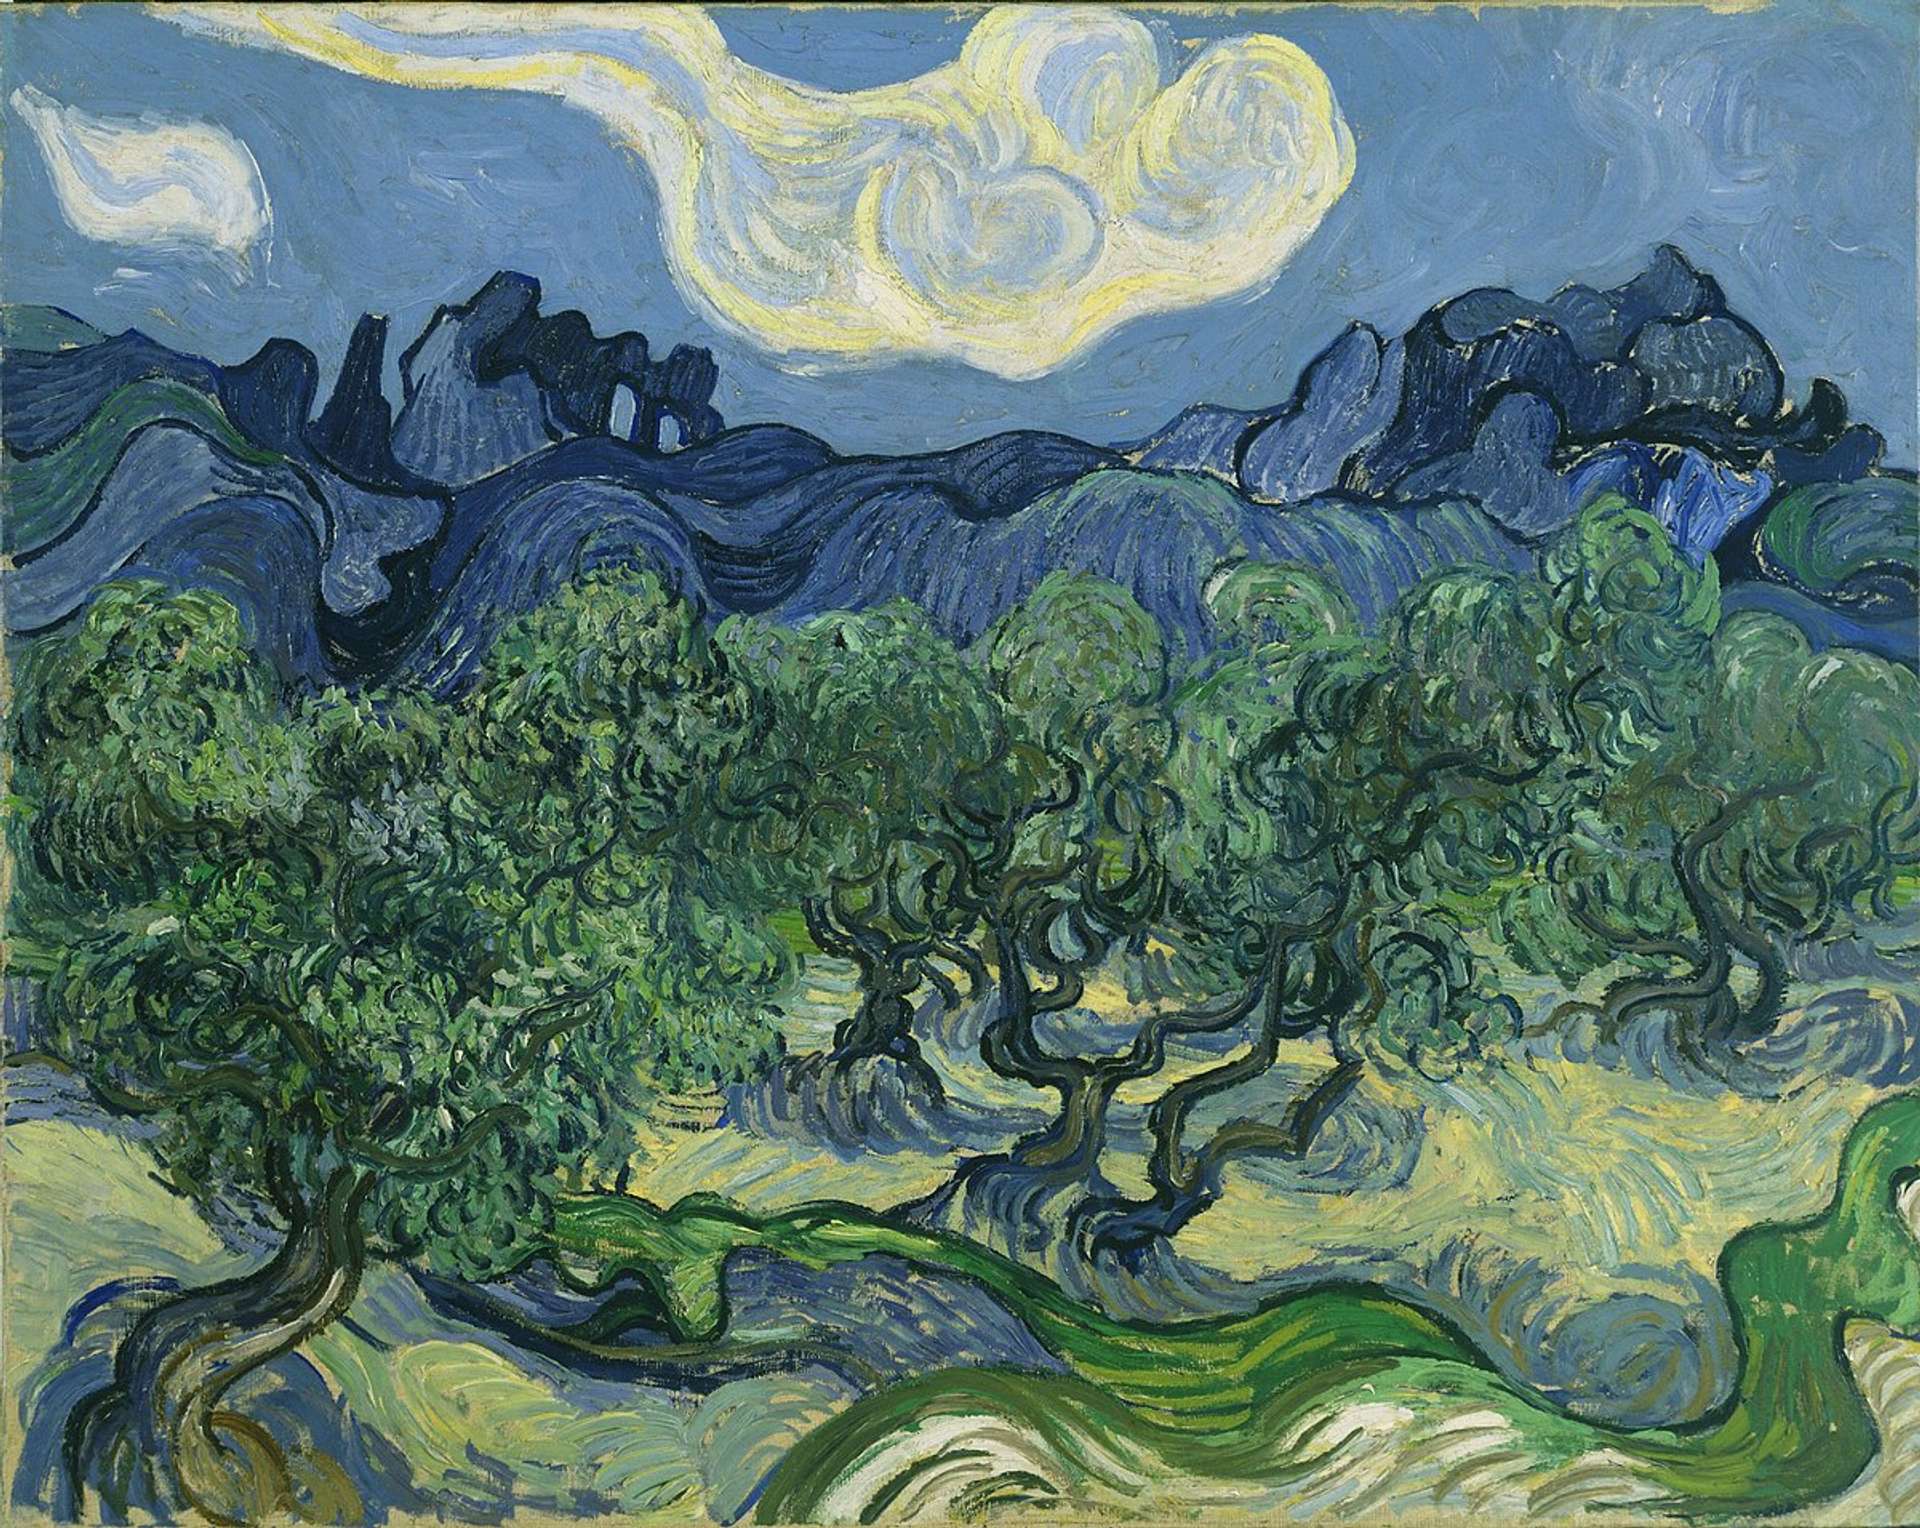 An oil painting titled "Les Oliviers" depicting a grove of olive trees in Saint-Rémy-de-Provence, with a mountain range in the background. The painting features thick, expressive brushstrokes in shades of green, blue, yellow, and brown.